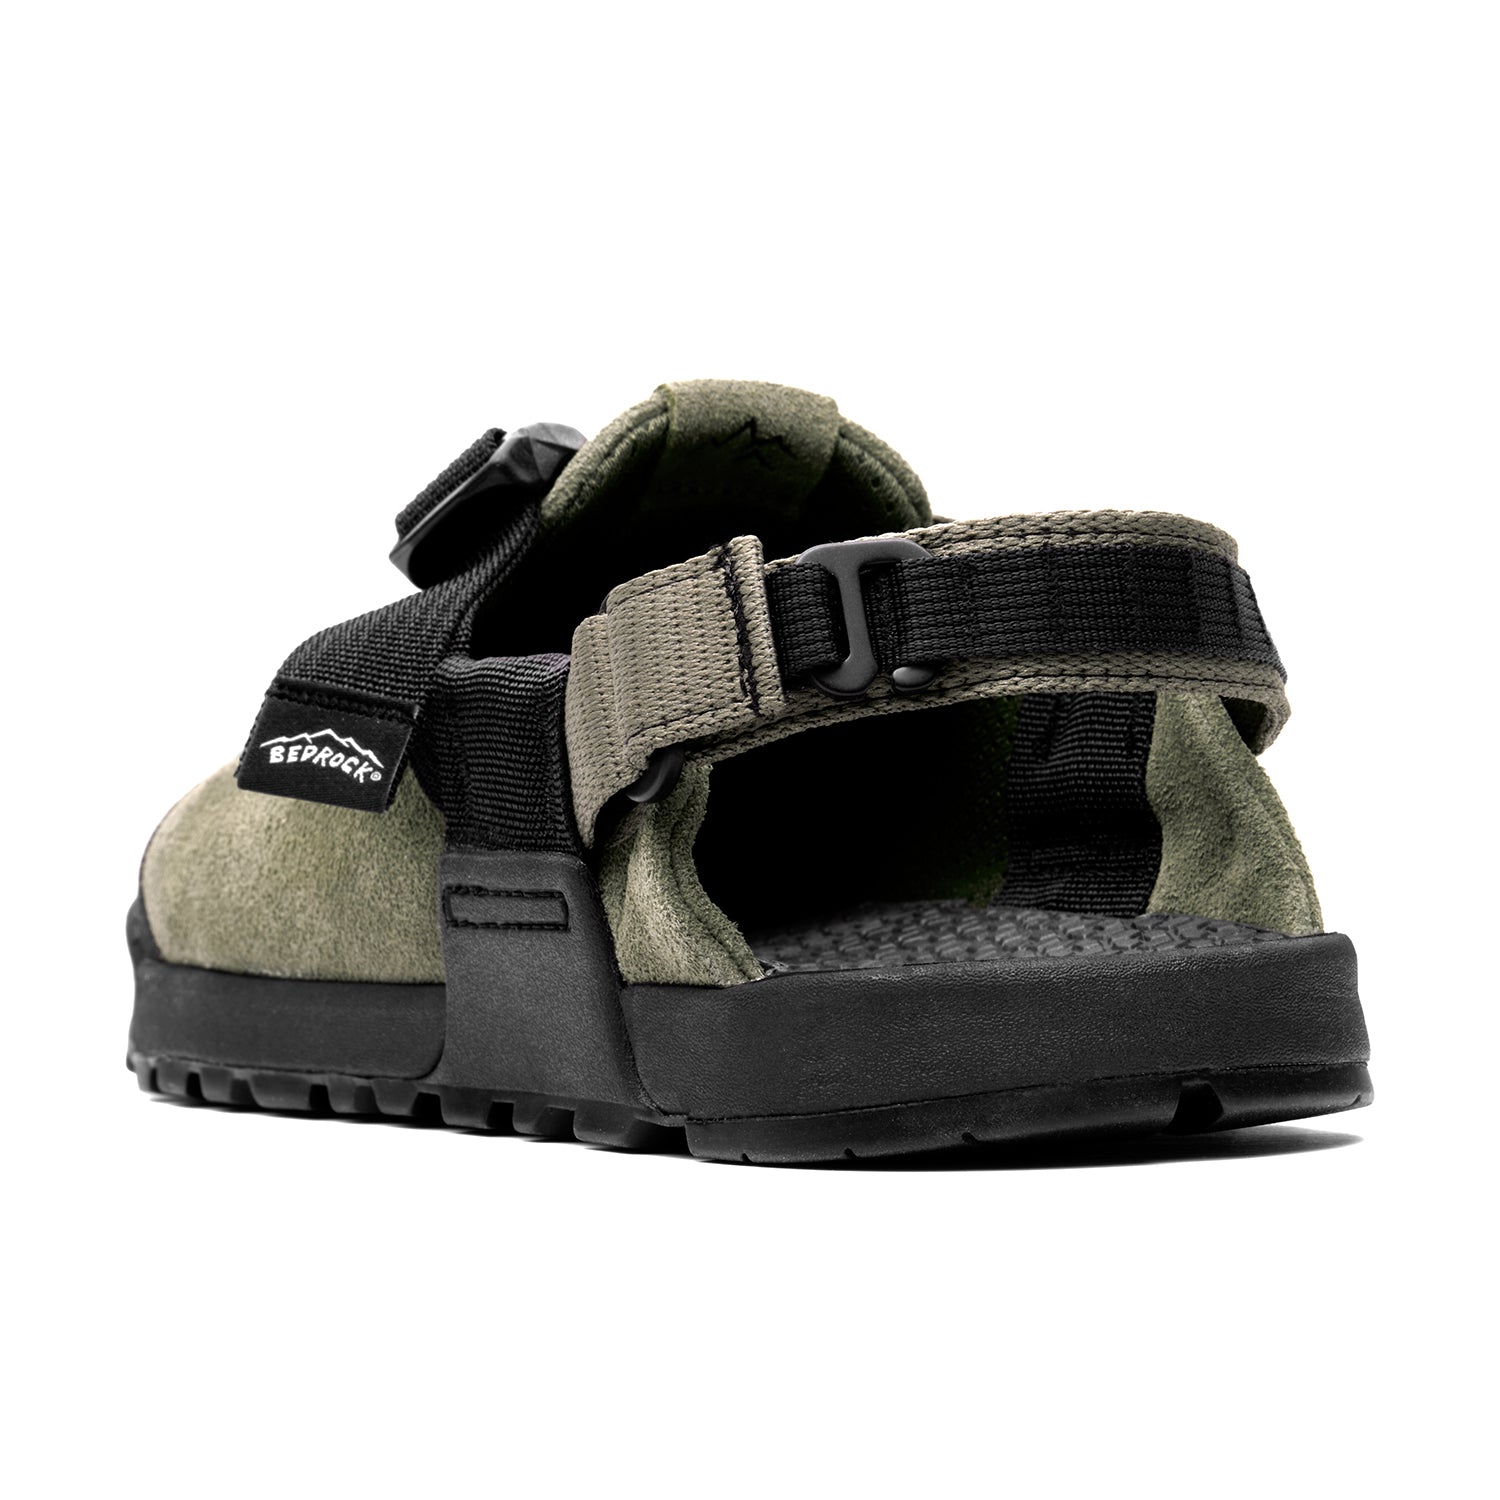 BEDROCK SANDALS Mountain Clog Suede Leather